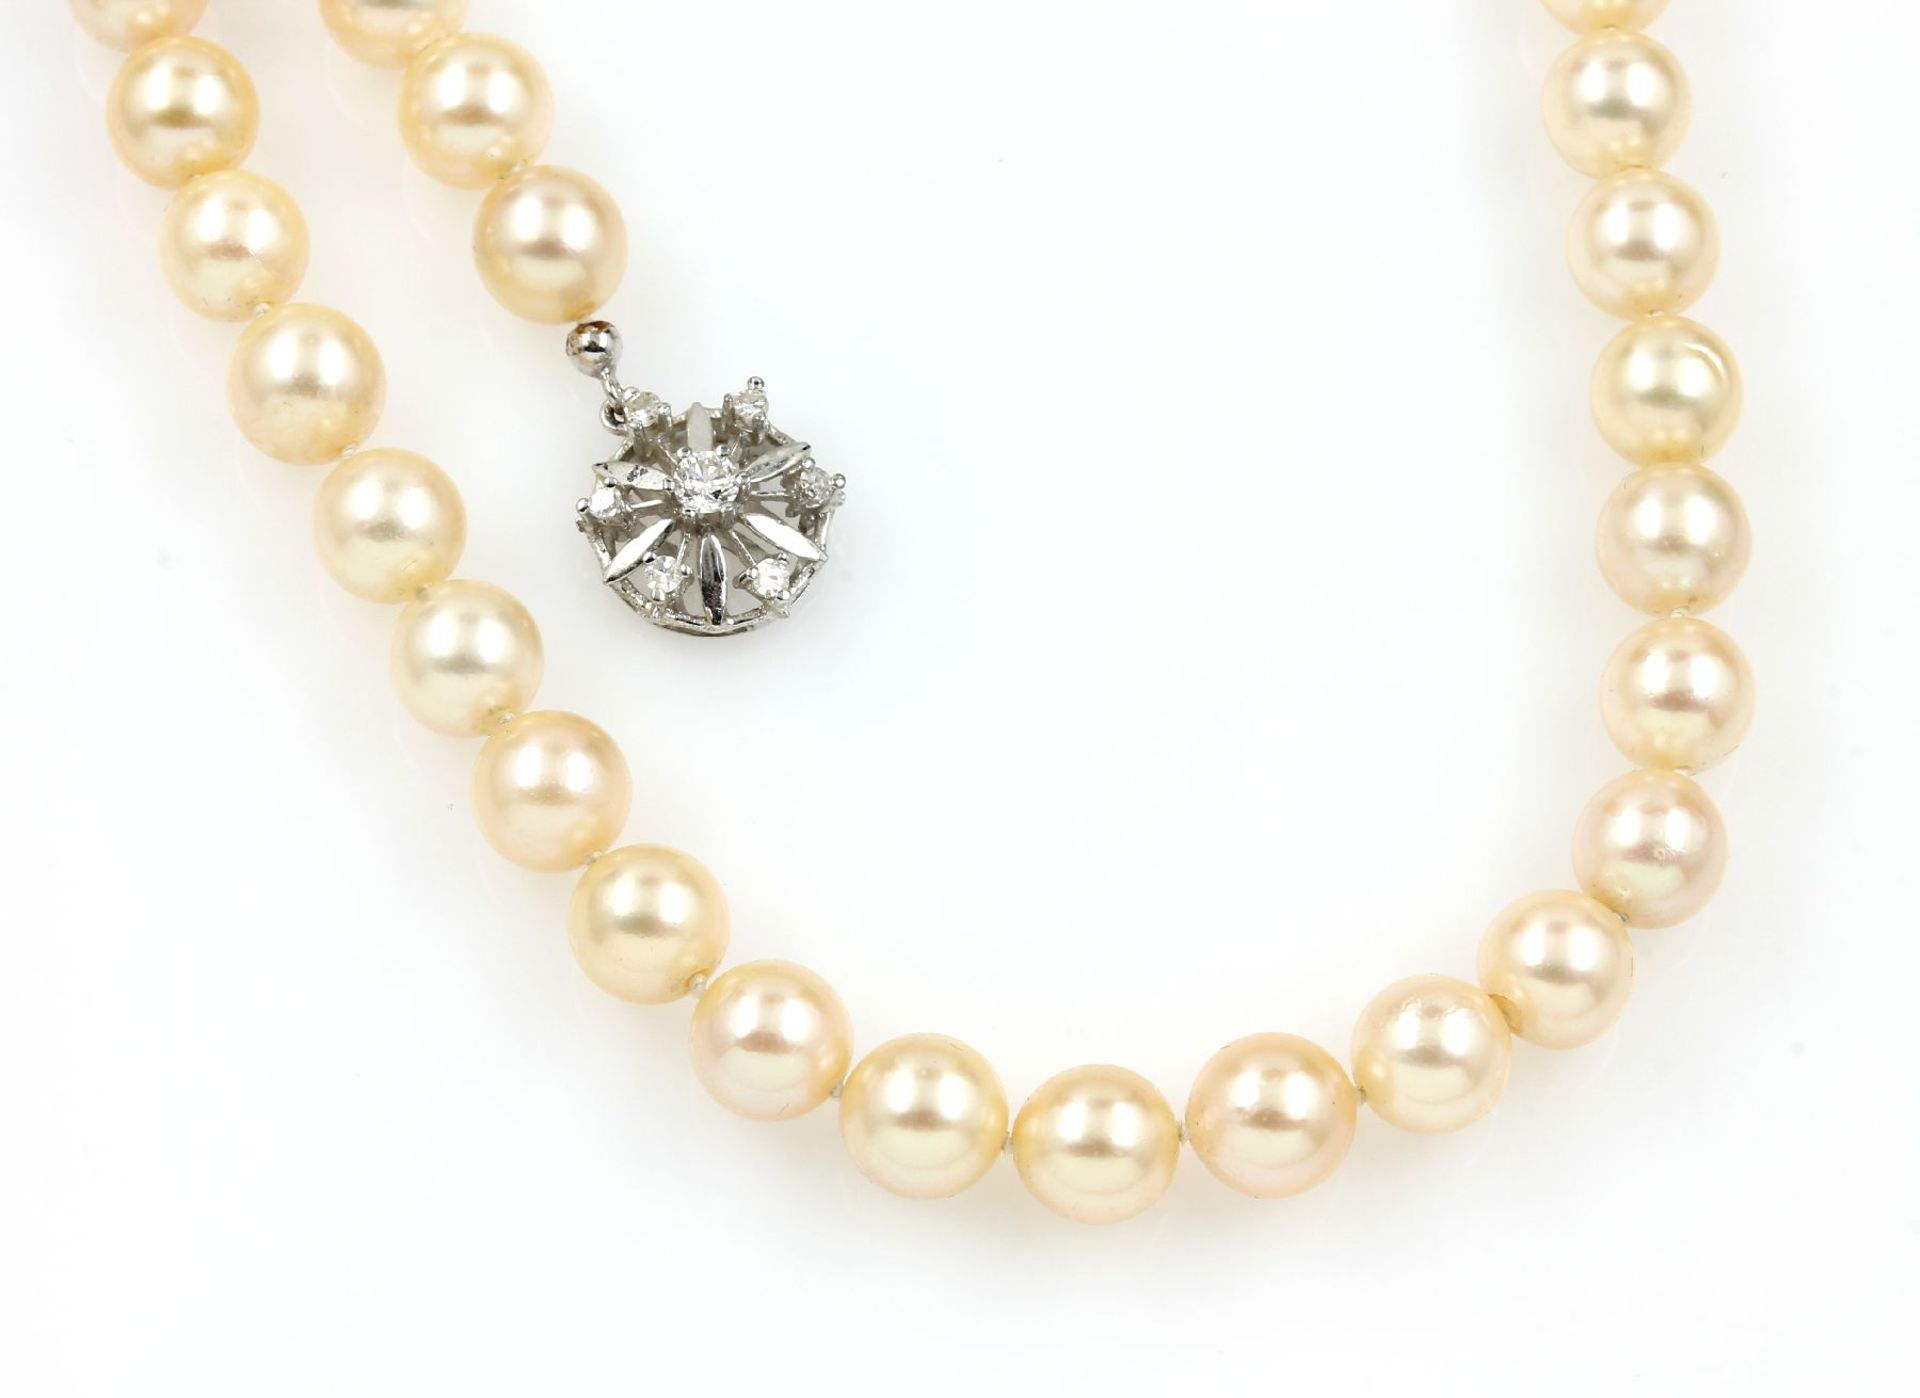 Necklace made of cultured akoya pearls , with WG 585/000 jewelry clasp with diamonds, gold yellow